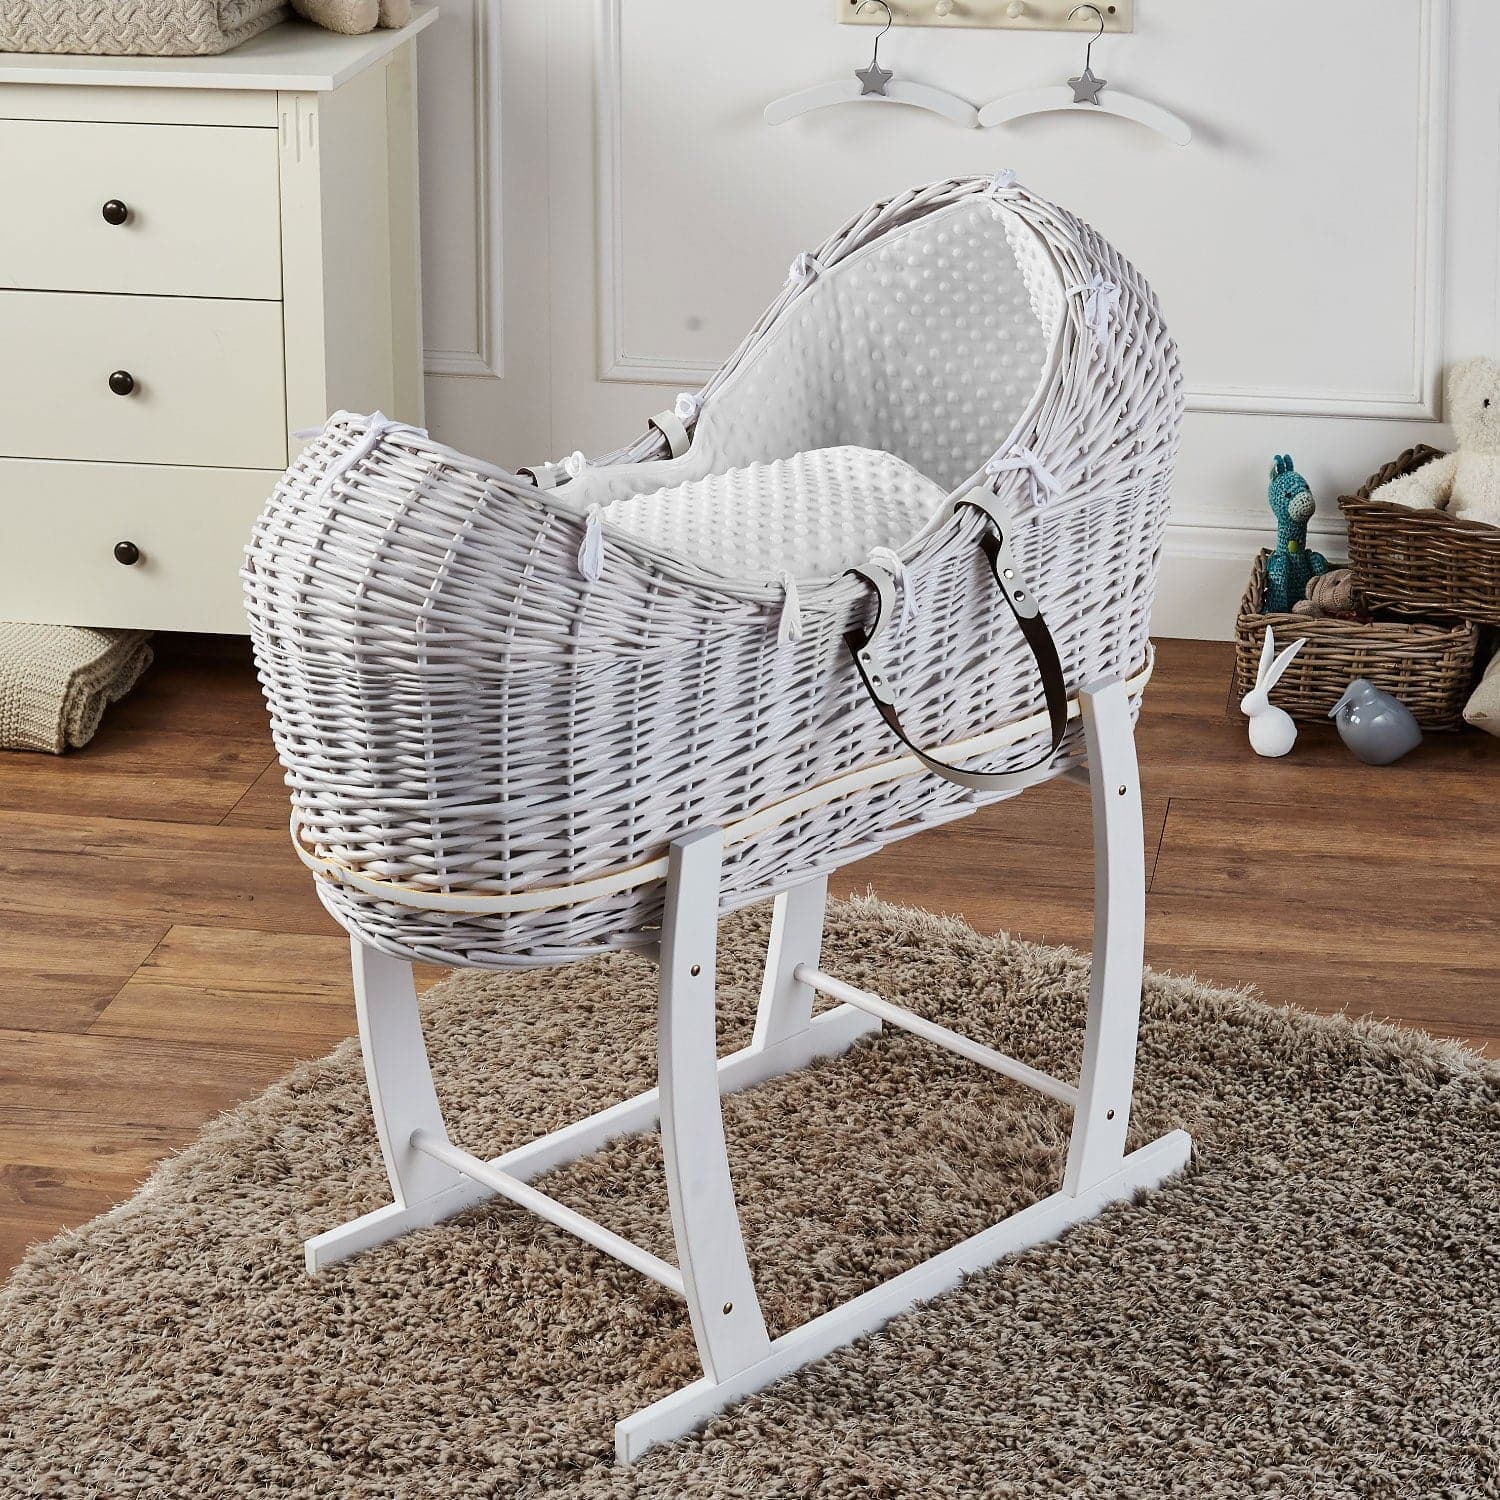 Wicker Deluxe Pod Baby Moses Basket With Stand - White / Dimple / Cream | For Your Little One